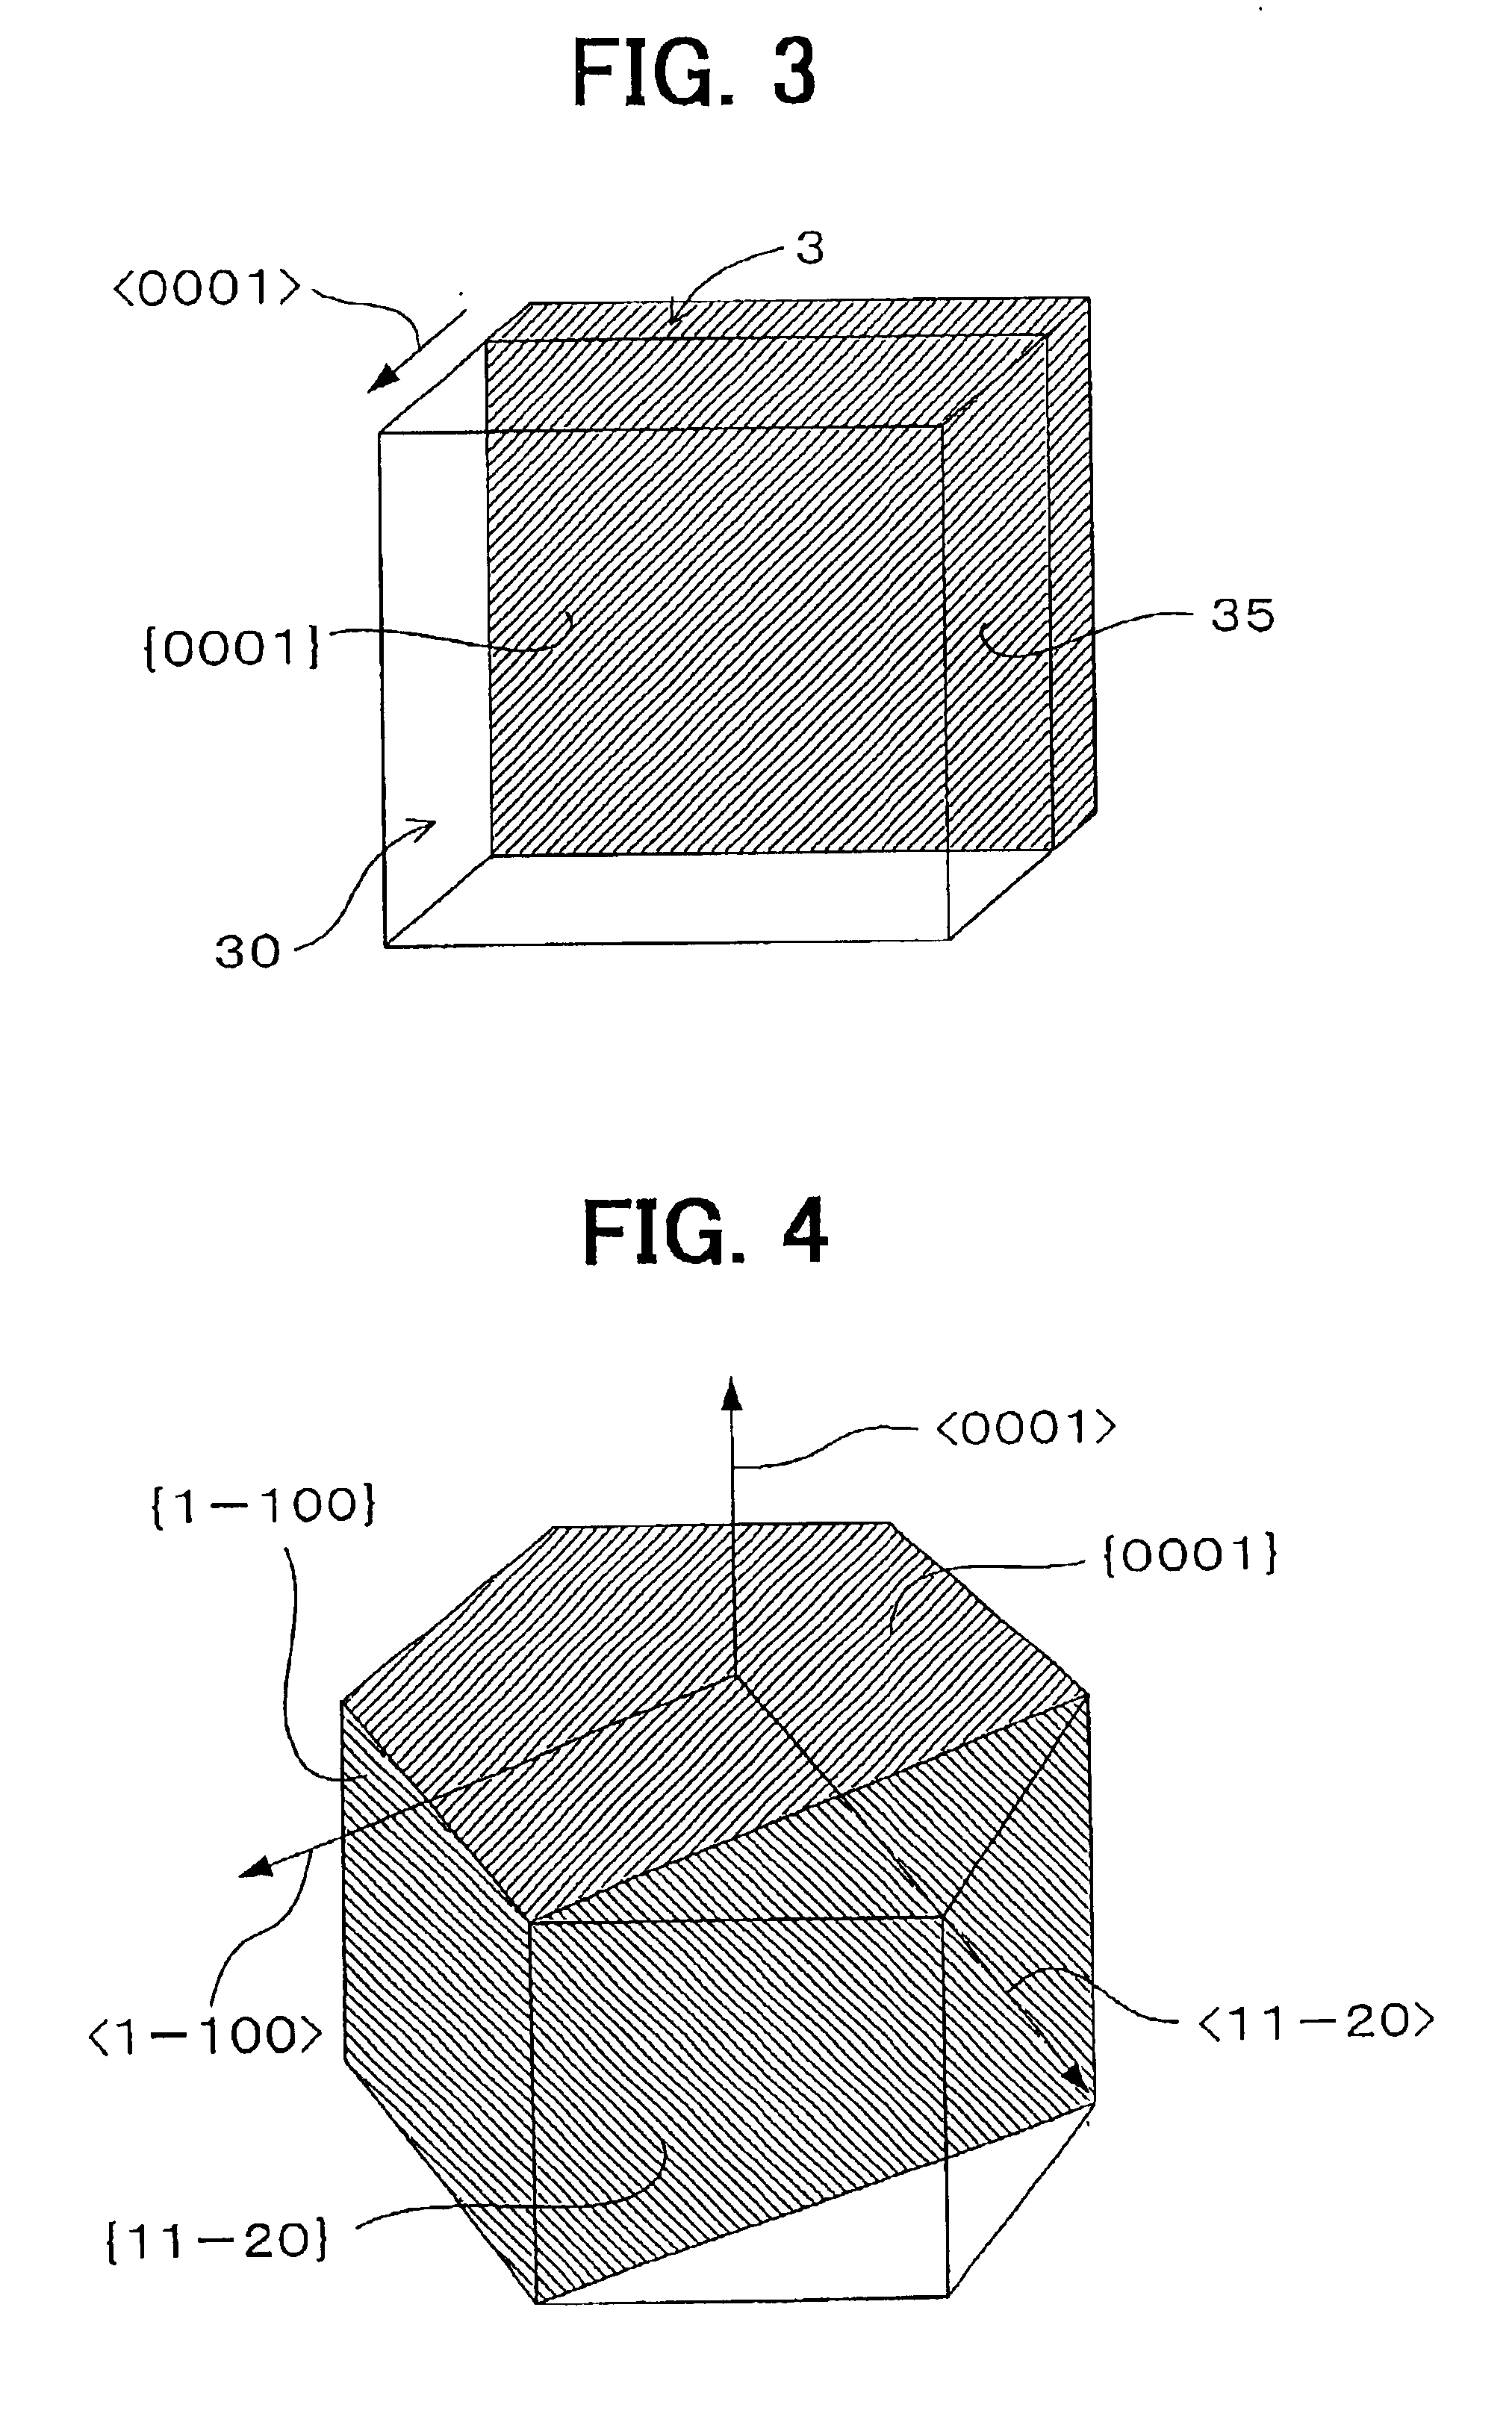 SiC single crystal, method for manufacturing SiC single crystal, SiC wafer having an epitaxial film, method for manufacturing SiC wafer having an epitaxial film, and SiC electronic device